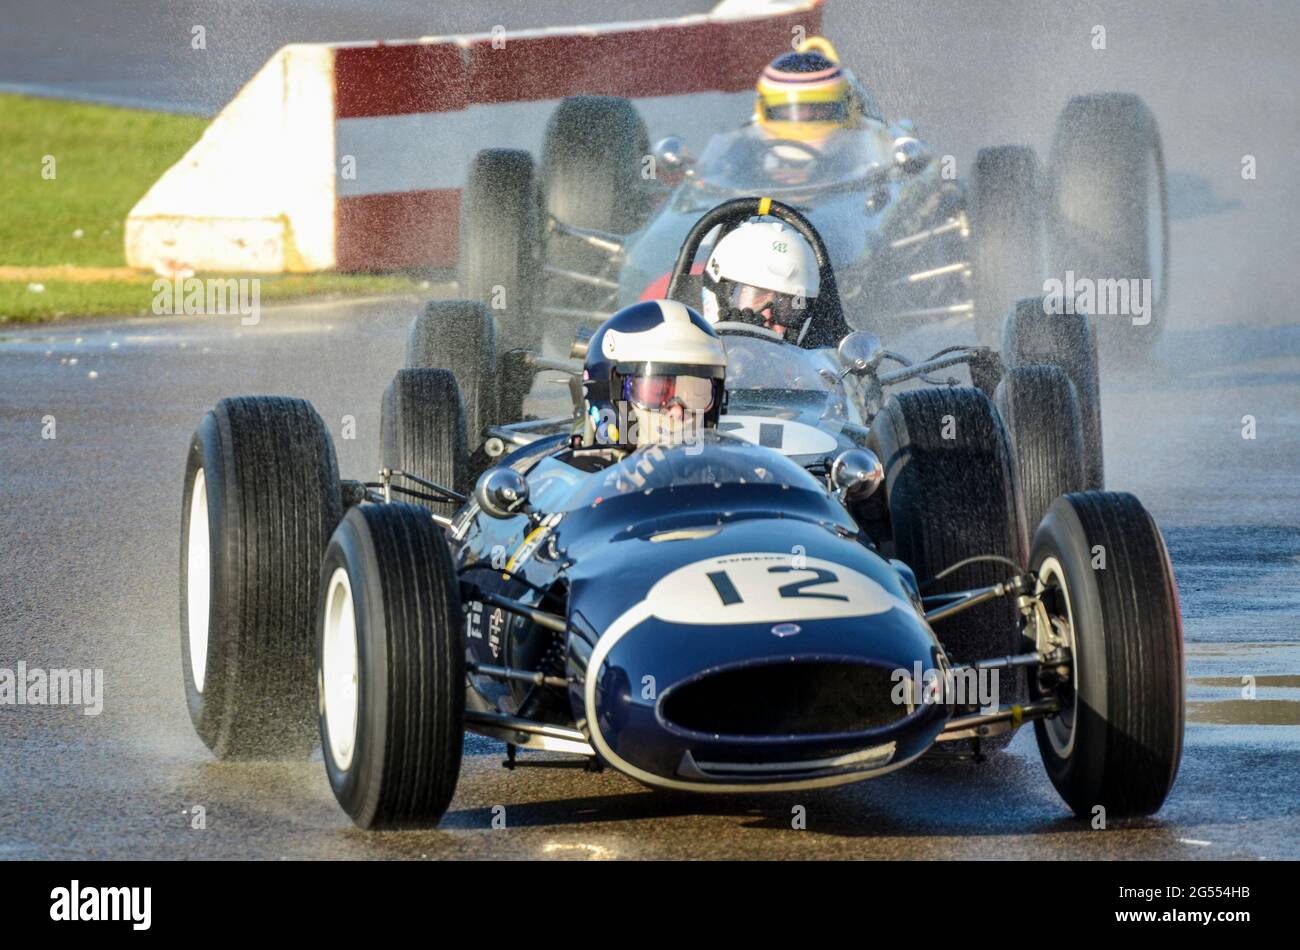 Cooper Climax T66 classic racing car racing in the Glover Trophy at the Goodwood Revival 2011, on a wet track after rain. Vintage Grand Prix car Stock Photo